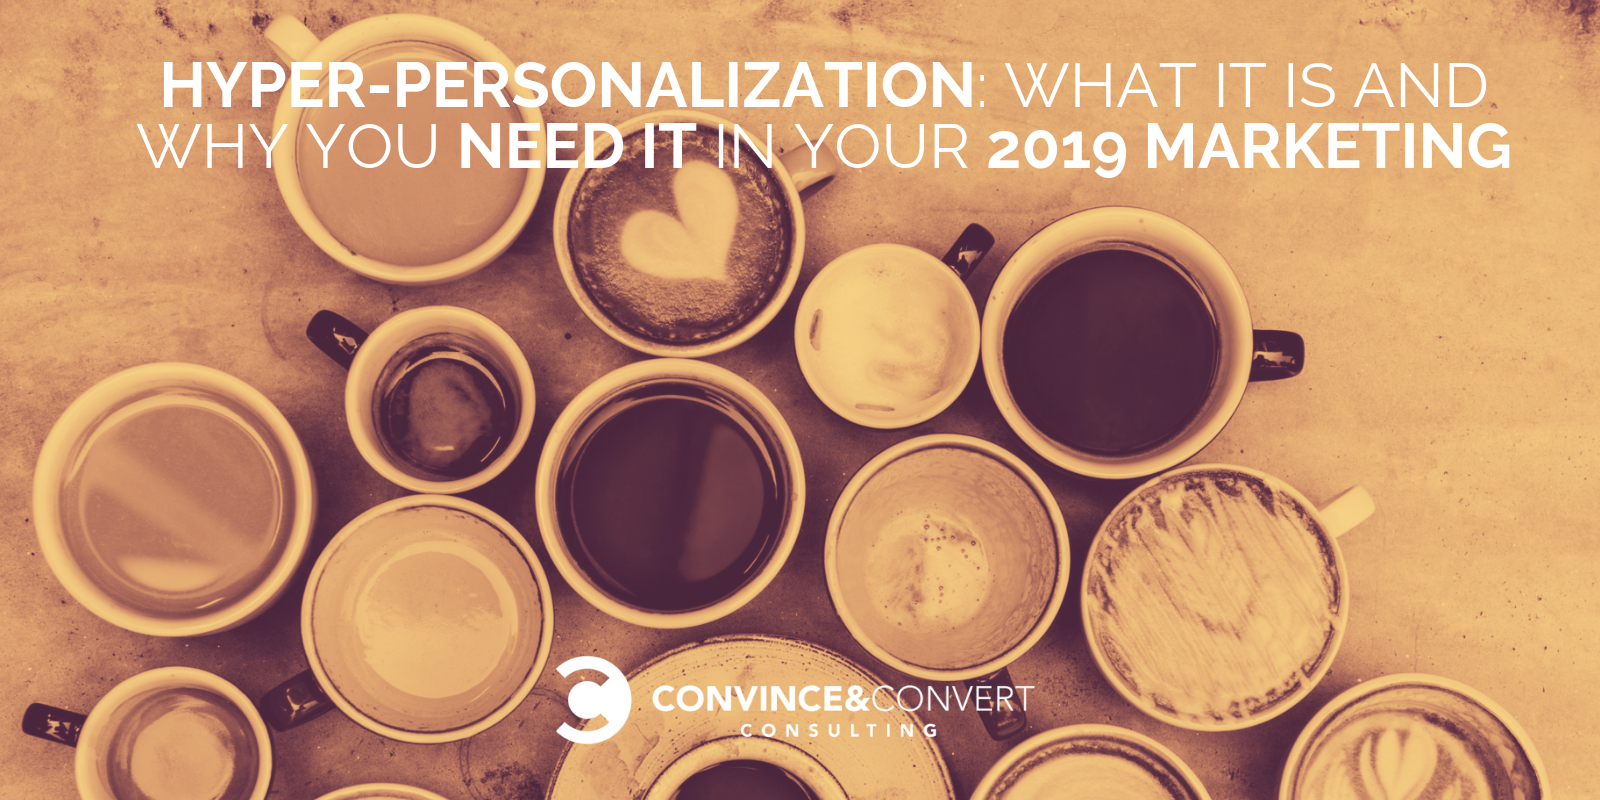 Hyper-Personalization: What It Is and Why You Need It in Your 2019 Marketing